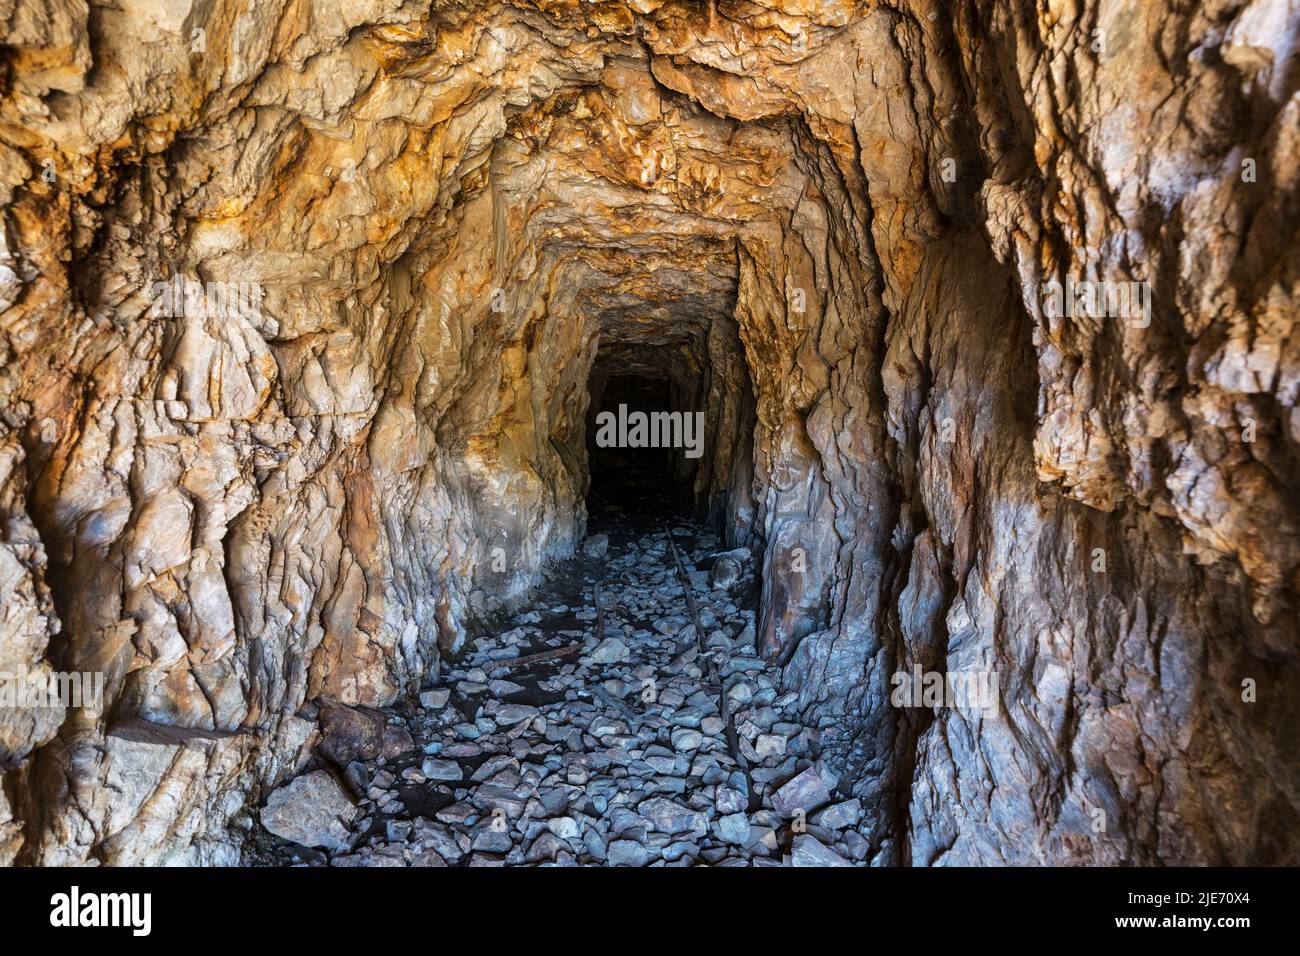 View inside abandoned gold mine near Mammoth Lakes in the Sierra Nevada Mountains of California. Stock Photo